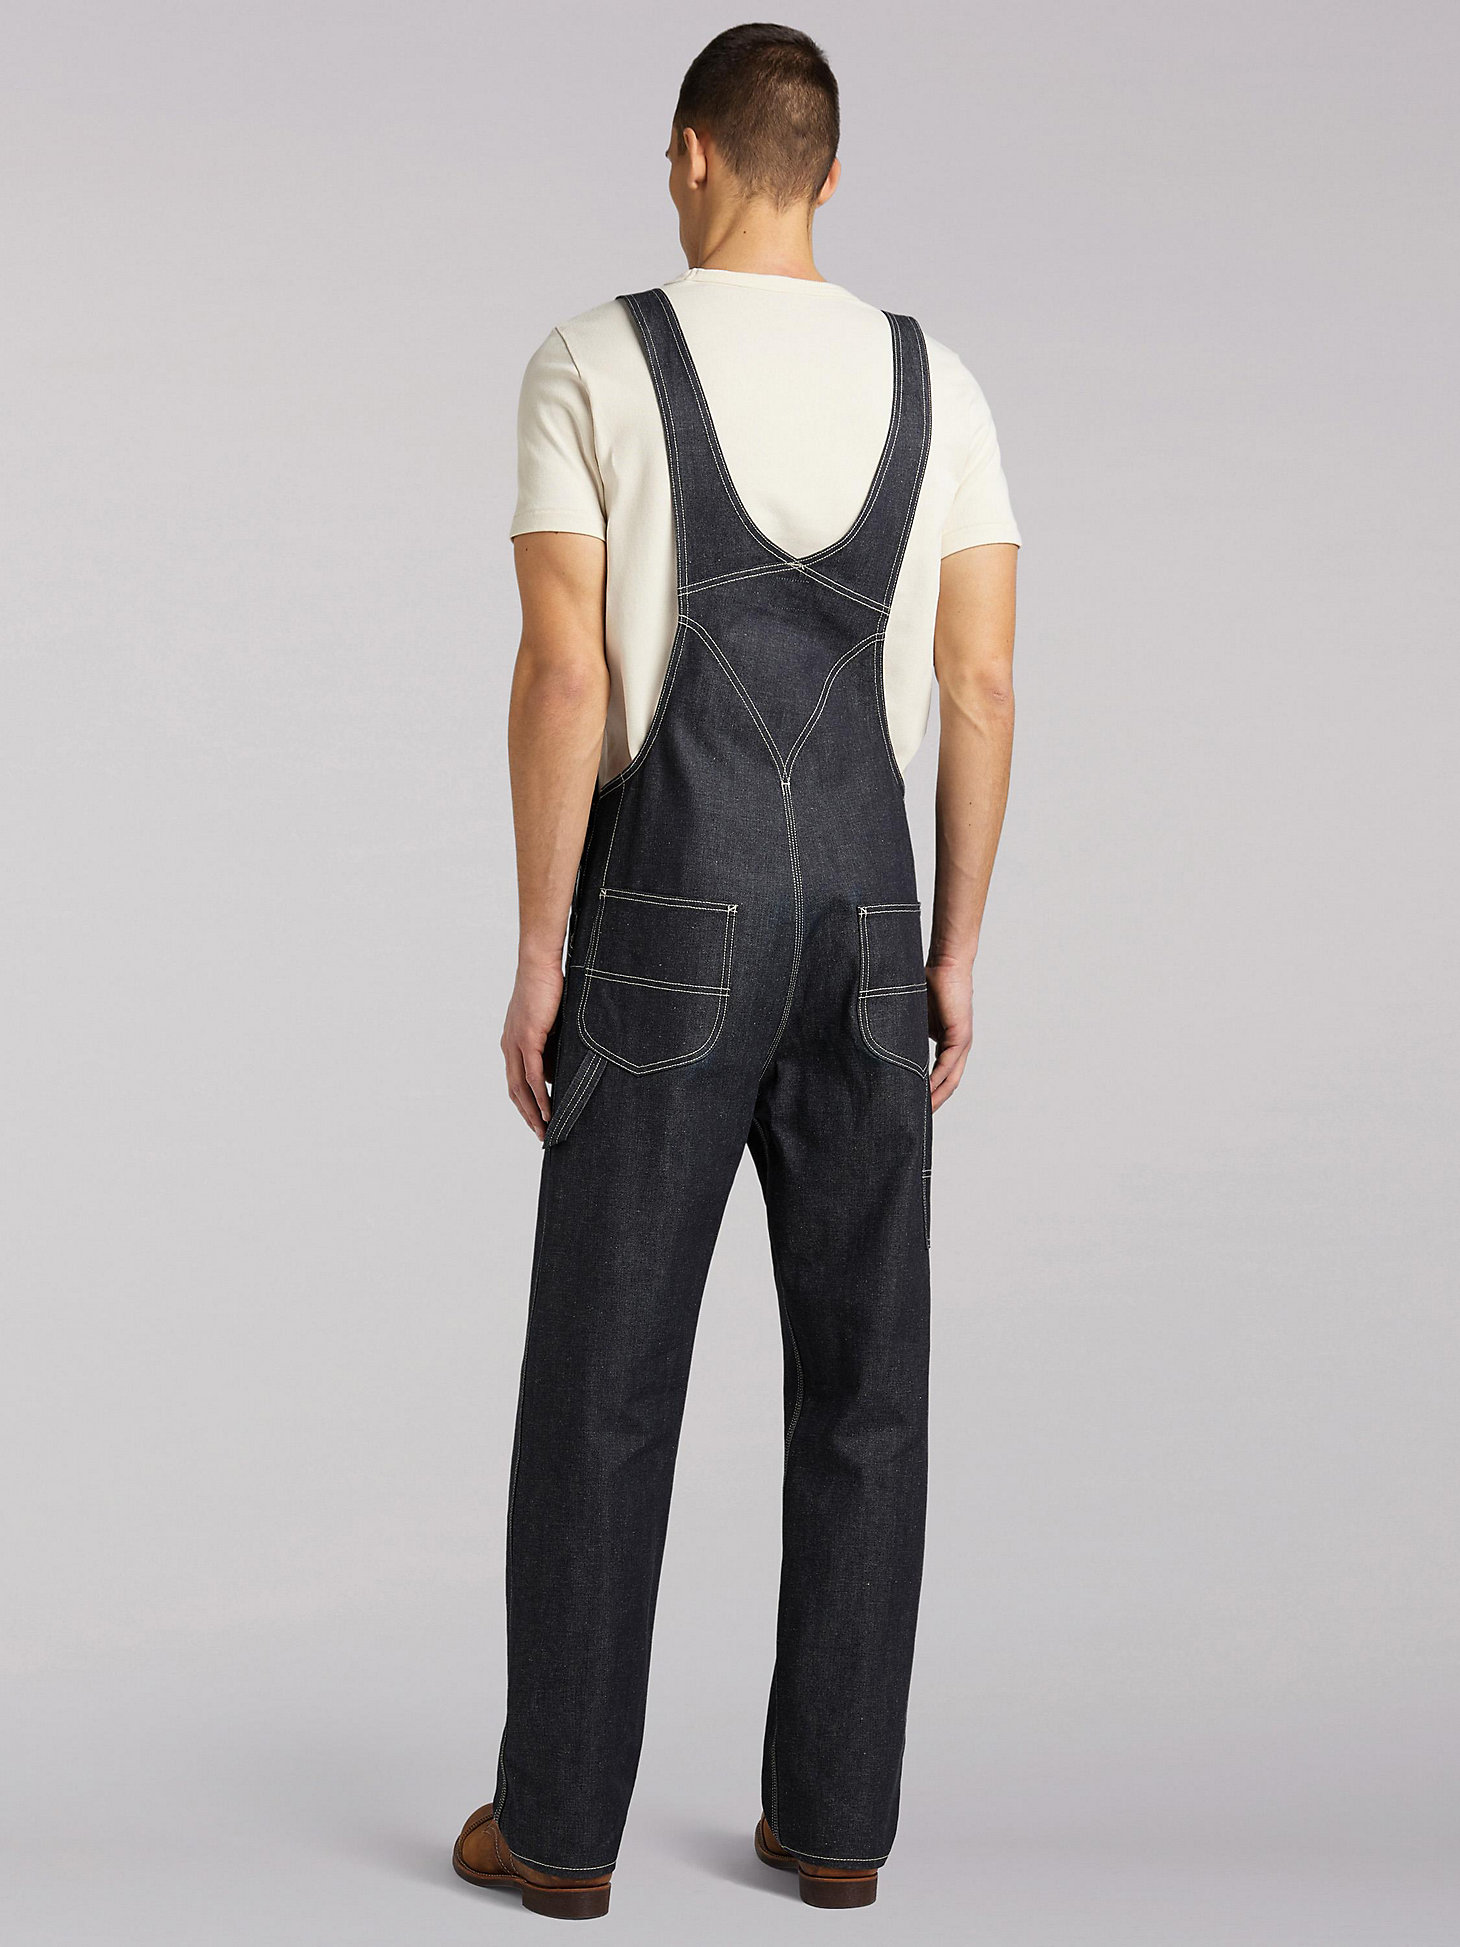 Men's Lee 101 Relaxed Fit Bib Overall in Dry alternative view 1